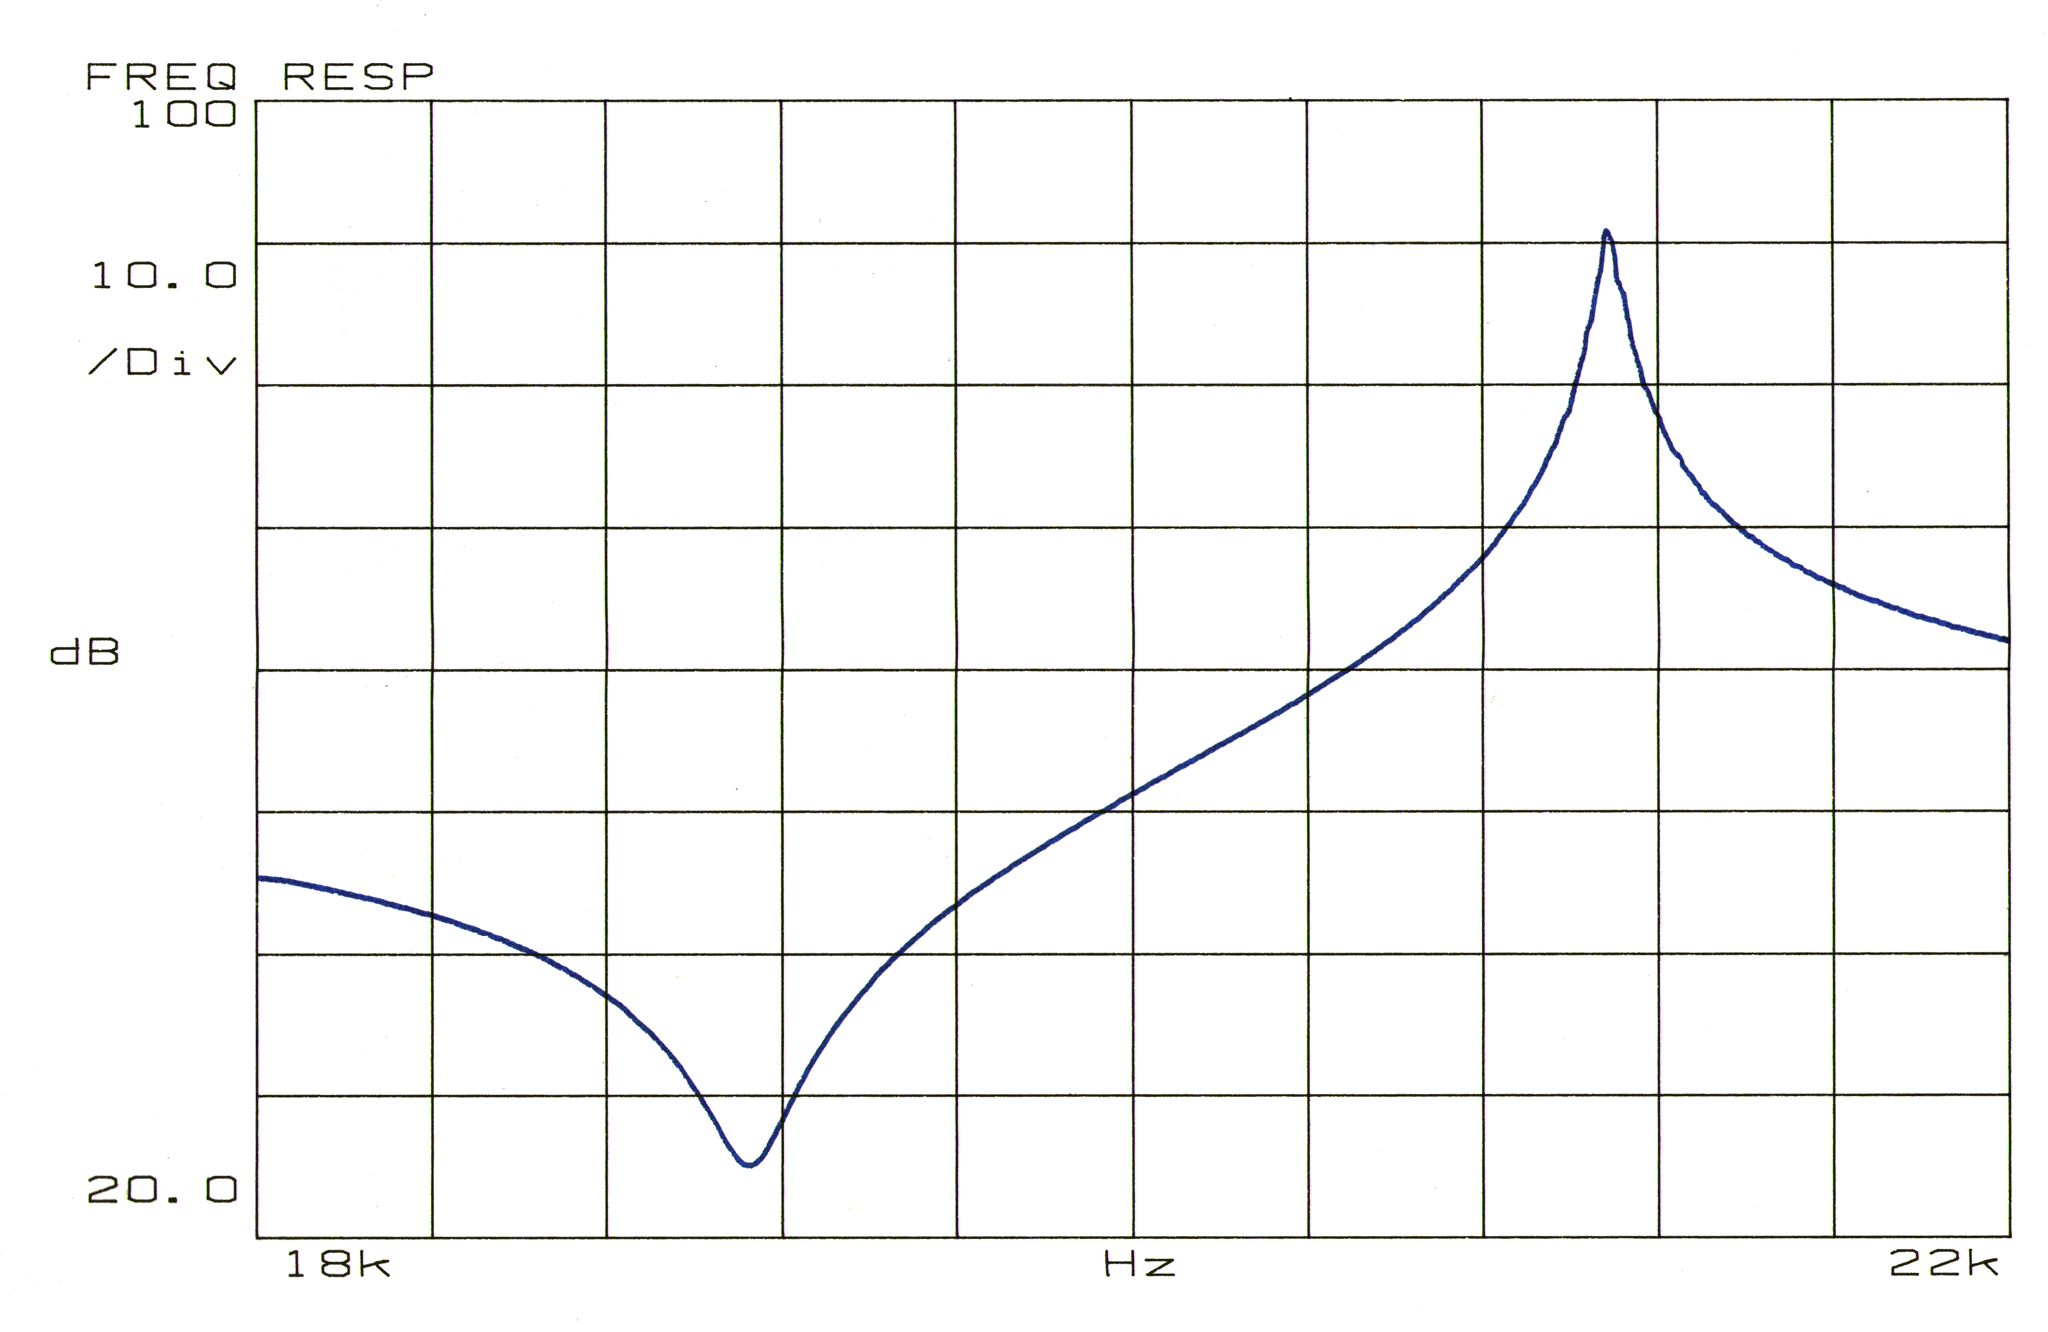 Graph - Frequency response impedance plot for 20 kHz ultrasonic transducer